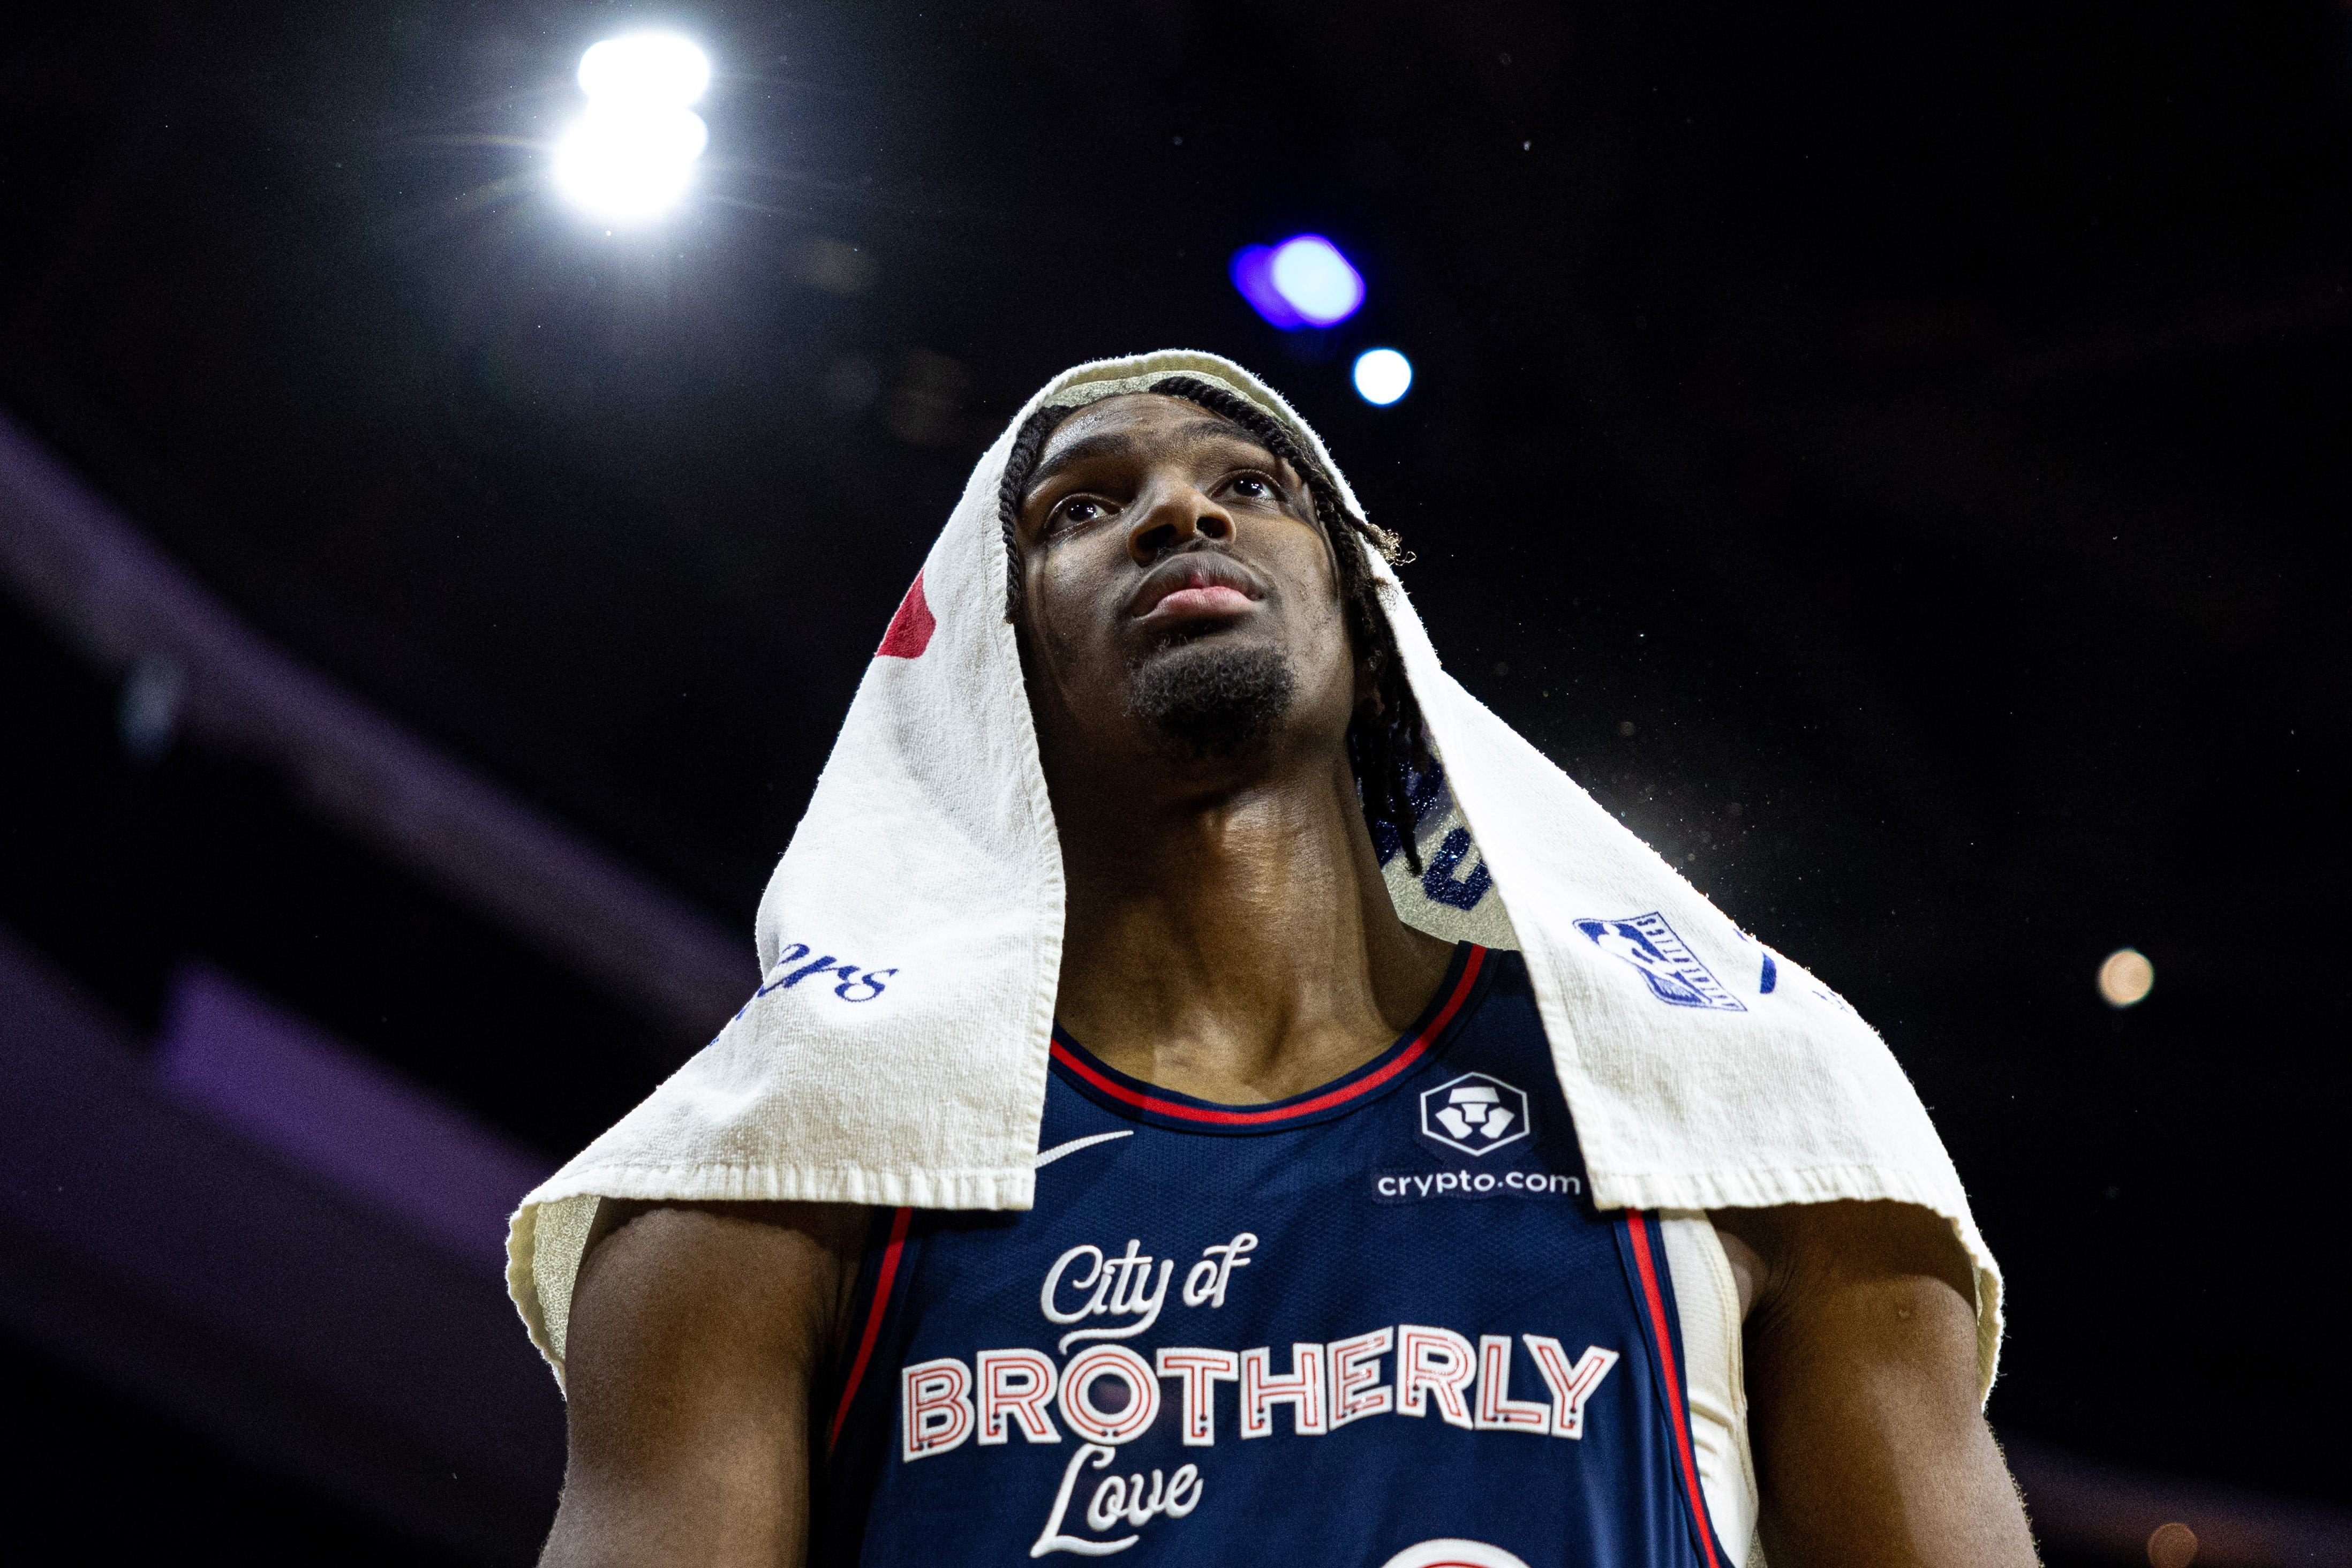 Sixers' Tyrese Maxey reveals he was drug tested after viral photos